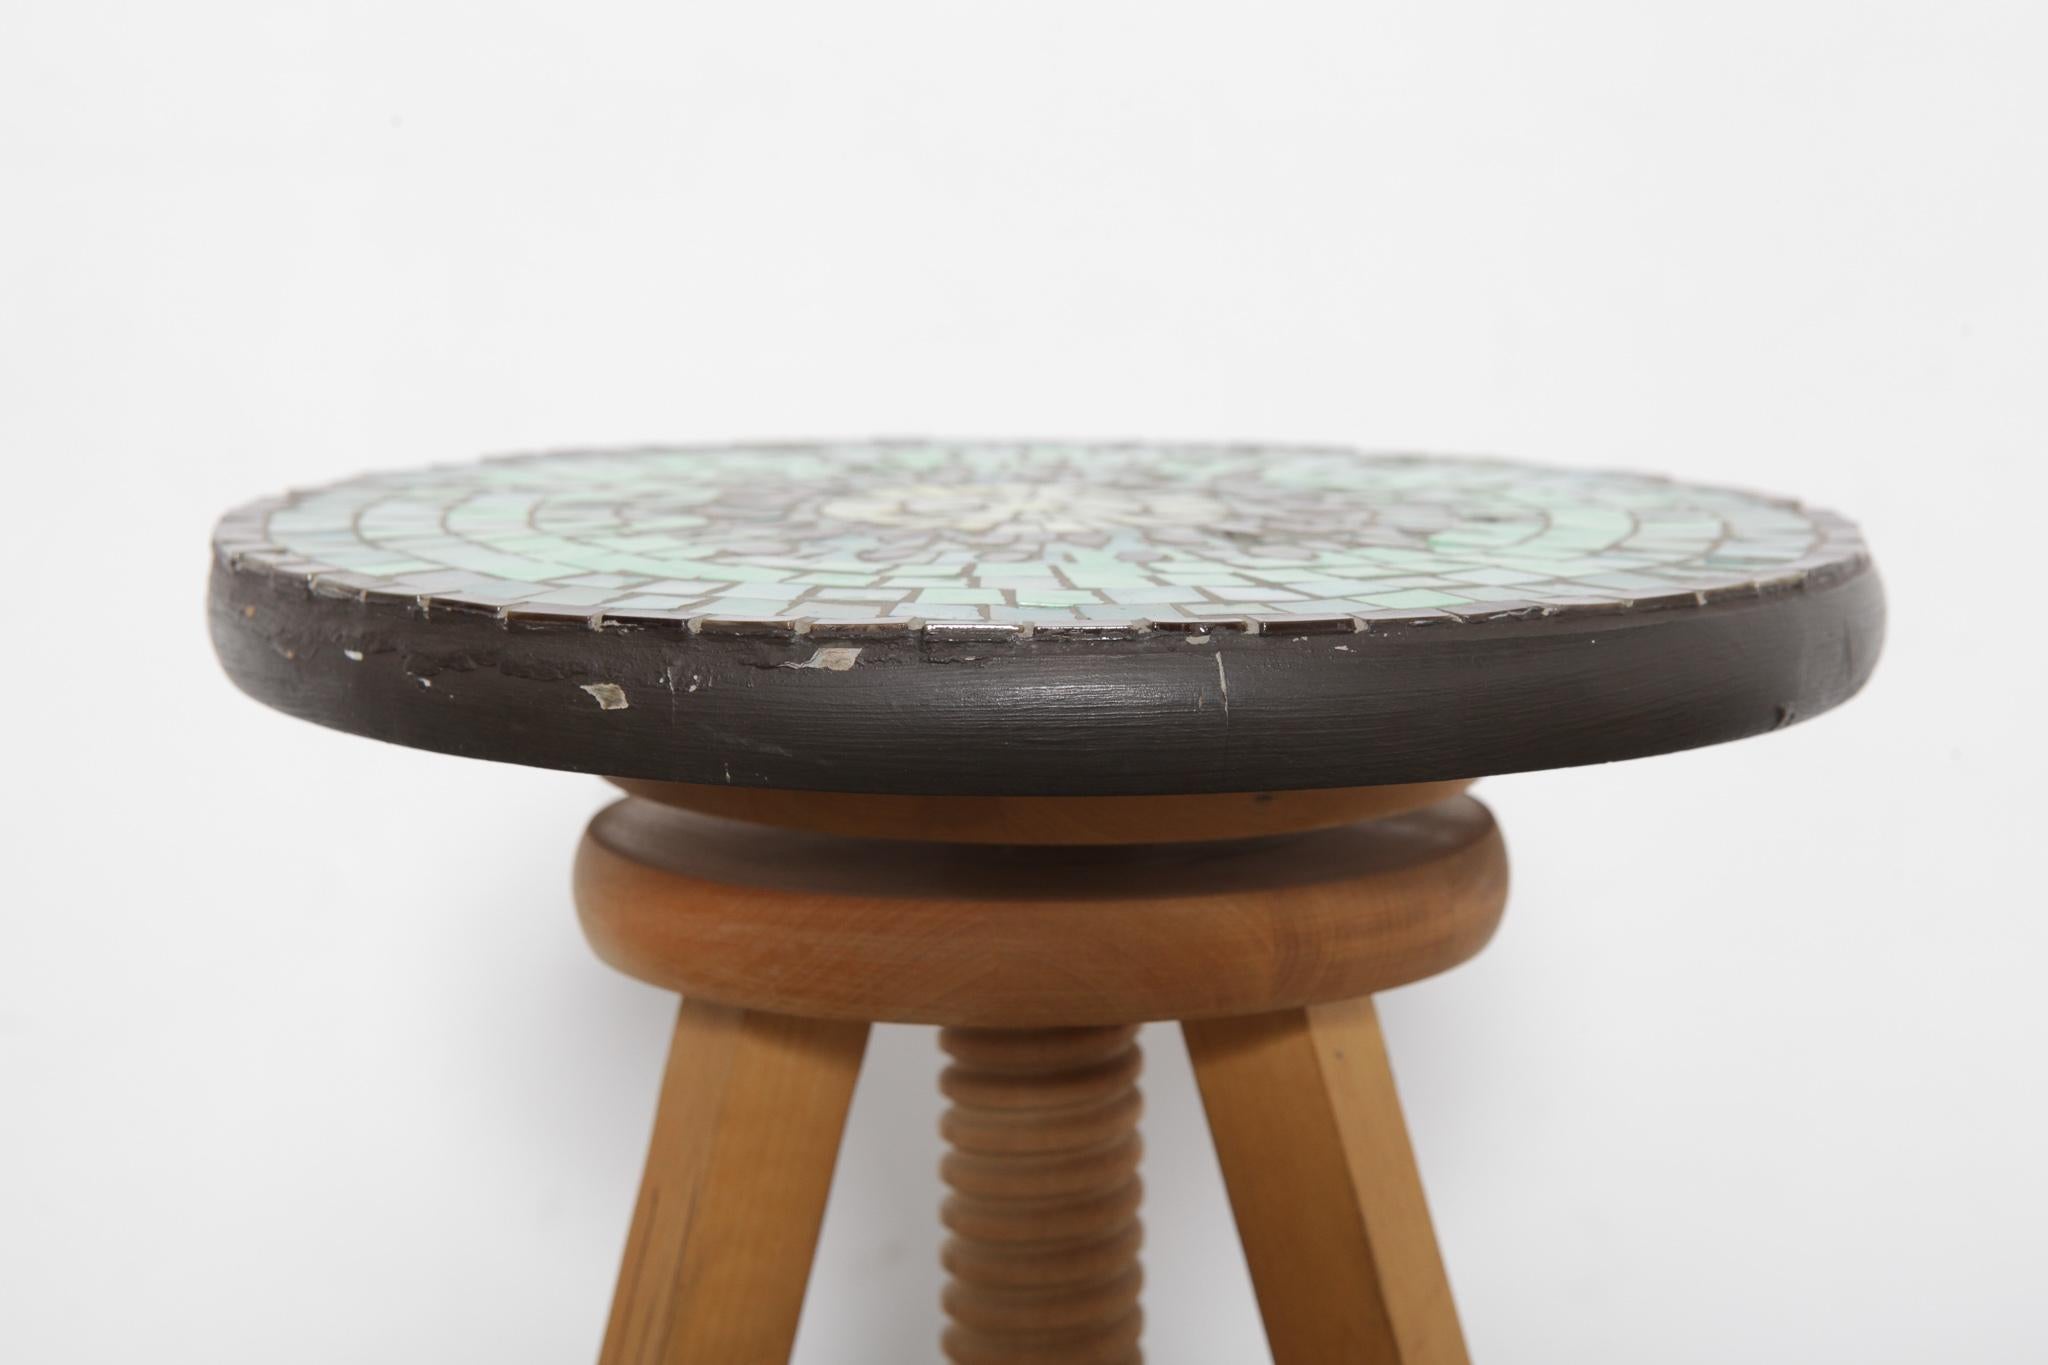 Mid-Century Modern Adjustable Stool from Finland with Mosaic Tile Seat by Designer Martin Cheek